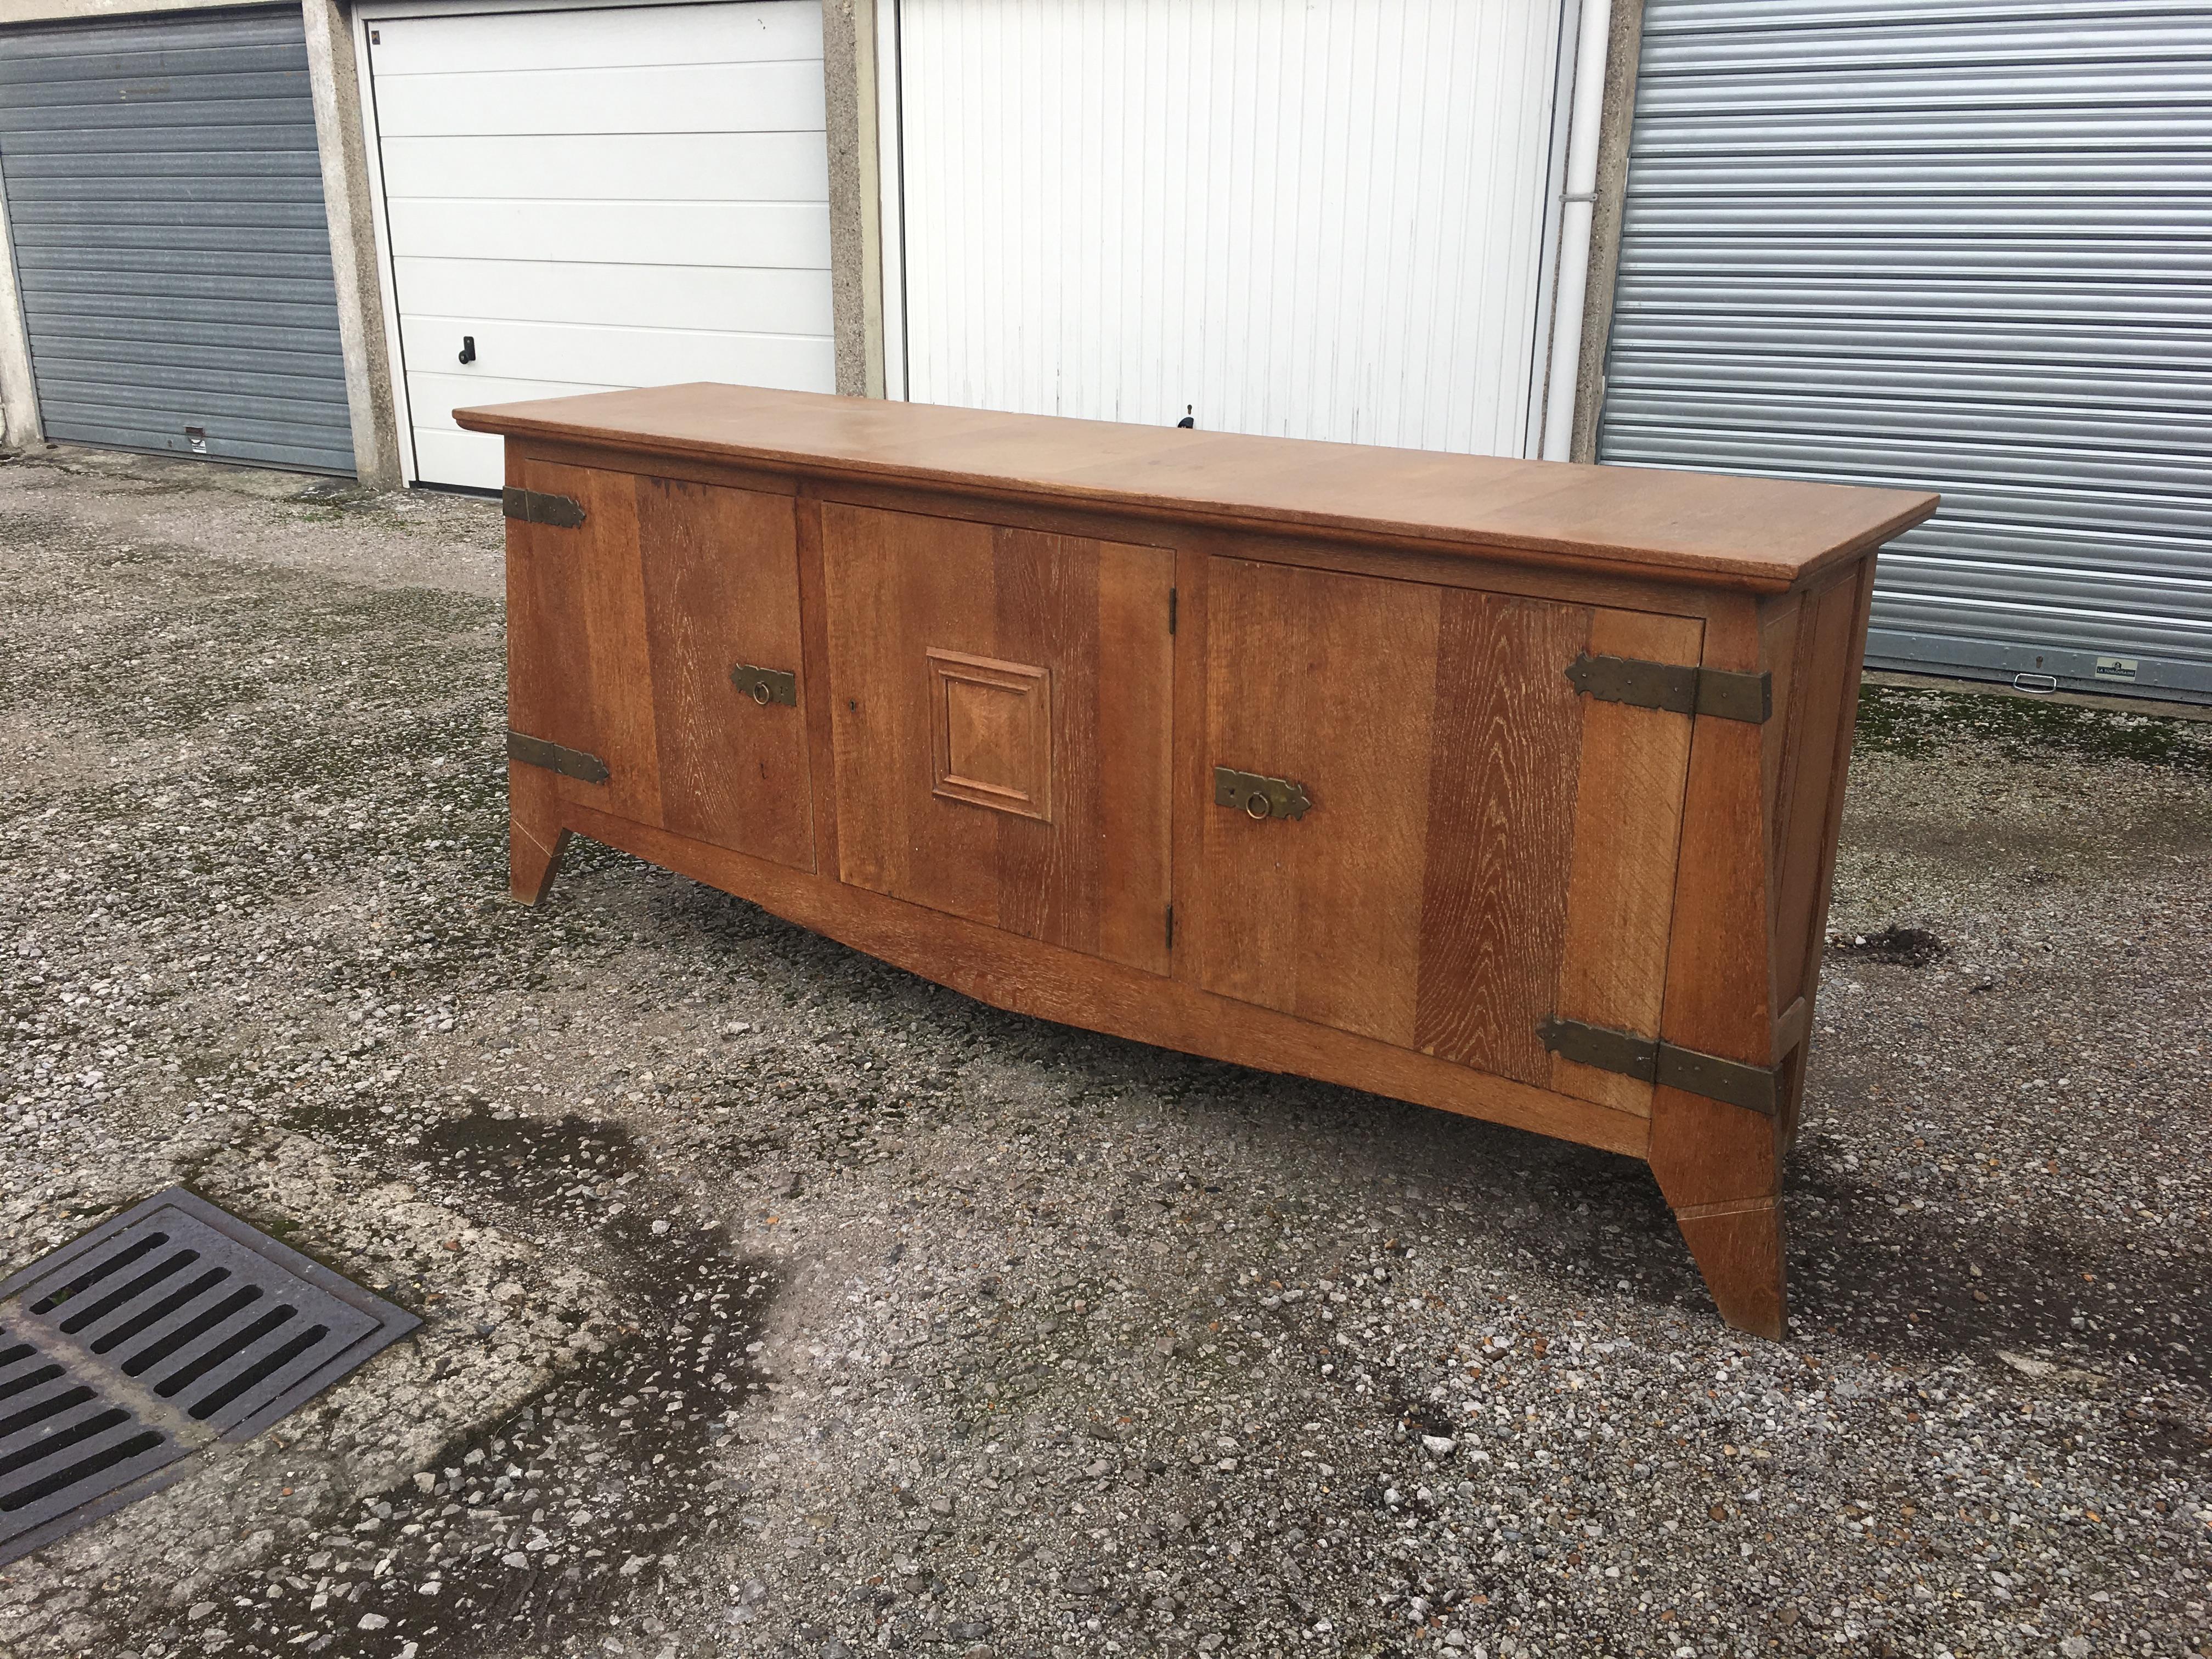 Art Deco sideboard in solid oak and oak veneer, and brass, circa 1940.
Small gaps in veneer on the back of the board.
the patina is a little dirty and needs to be redone